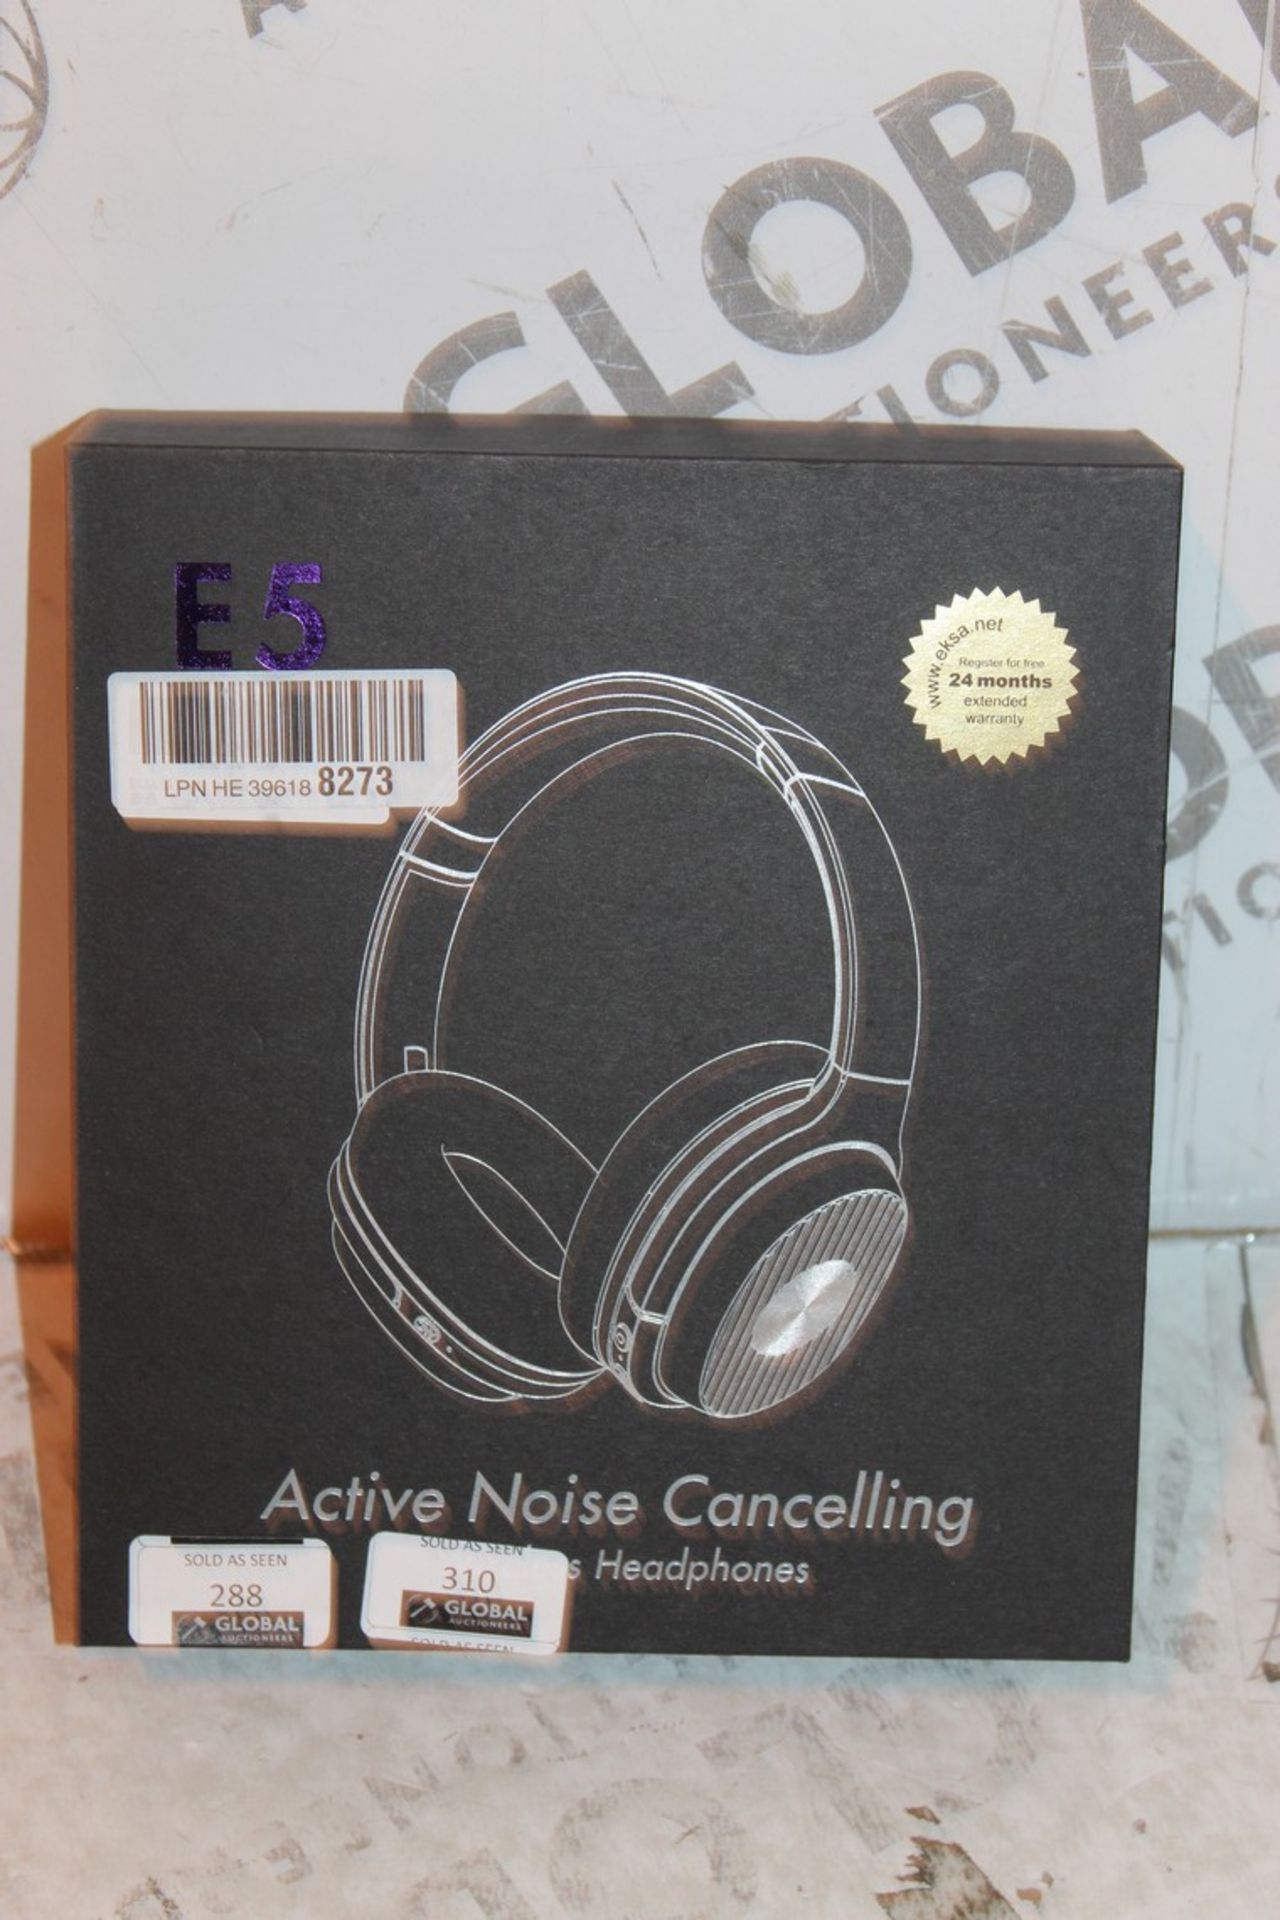 Boxed Pair E5 Active Noise Cancelling Wireless Headphones RRP £65 (Pictures Are For Illustration